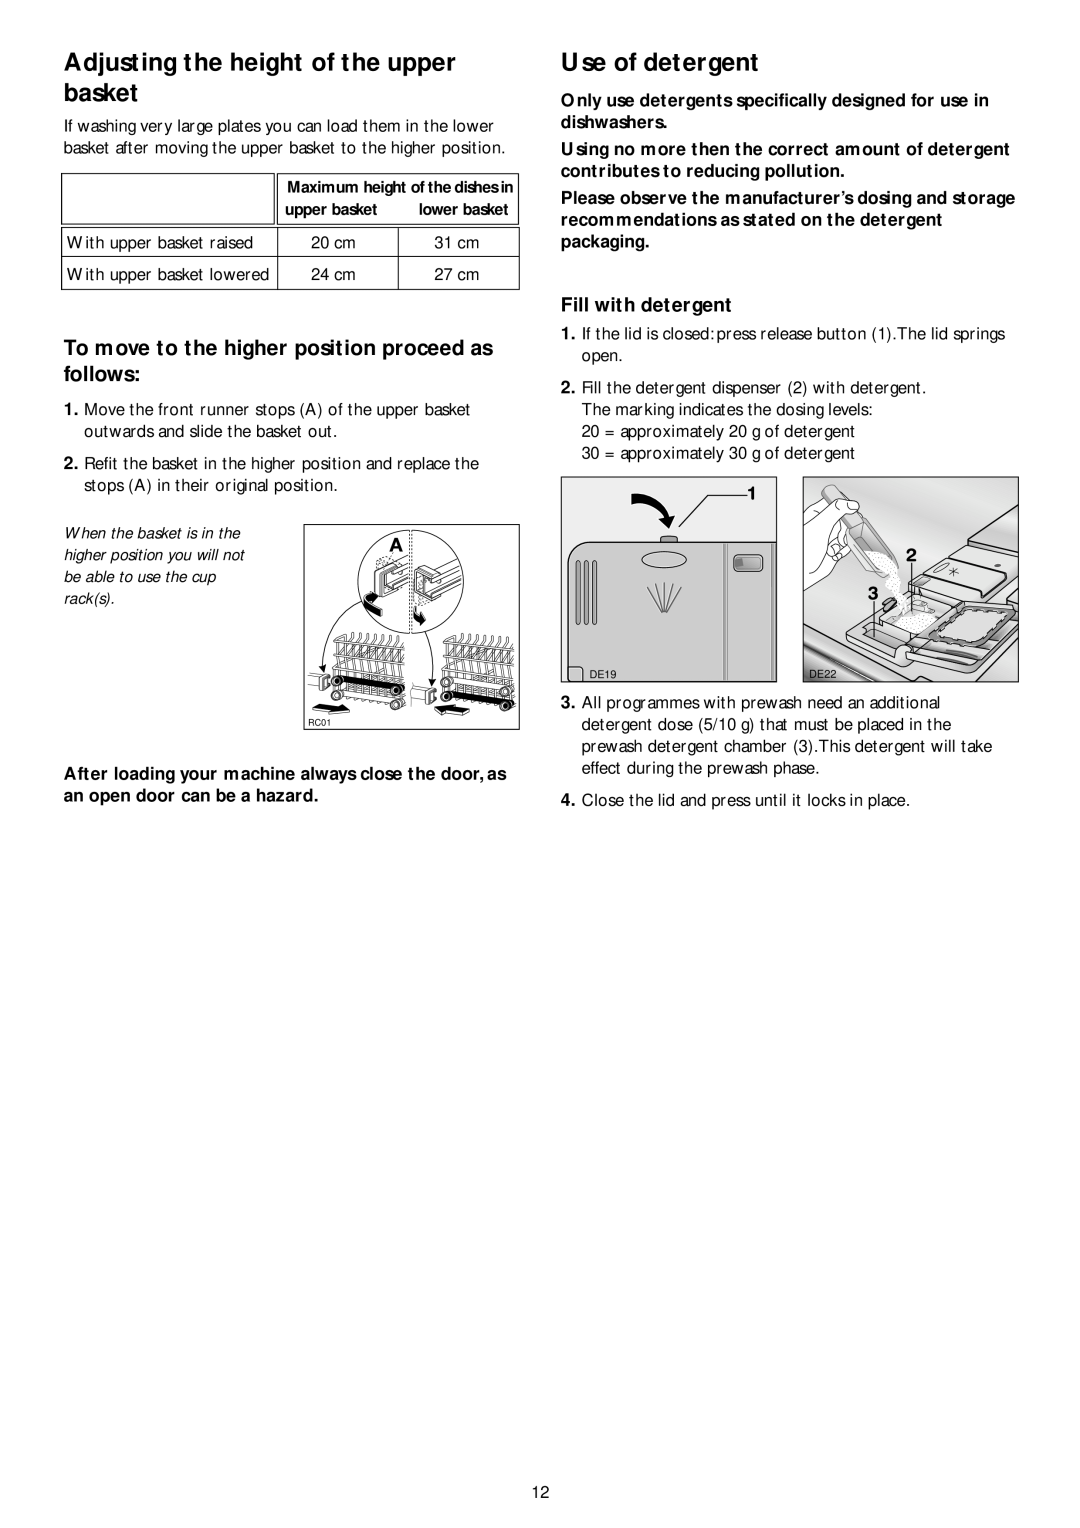 John Lewis JLDWW 1201 instruction manual Adjusting the height of the upper basket, Use of detergent, Fill with detergent 